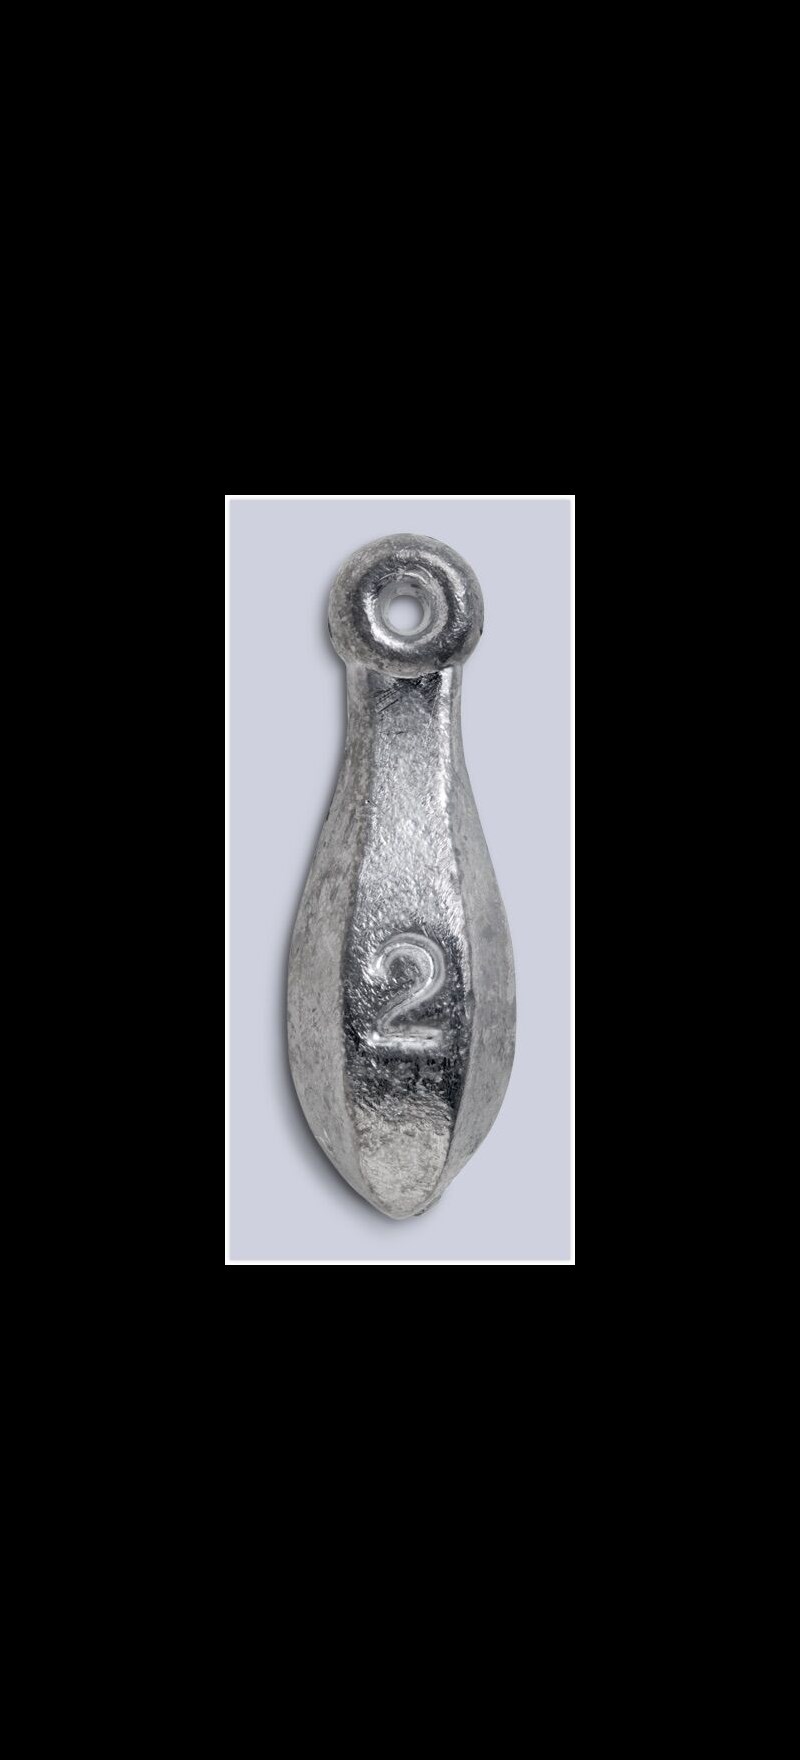 Bank Sinkers - Fishing, Bullet Weights